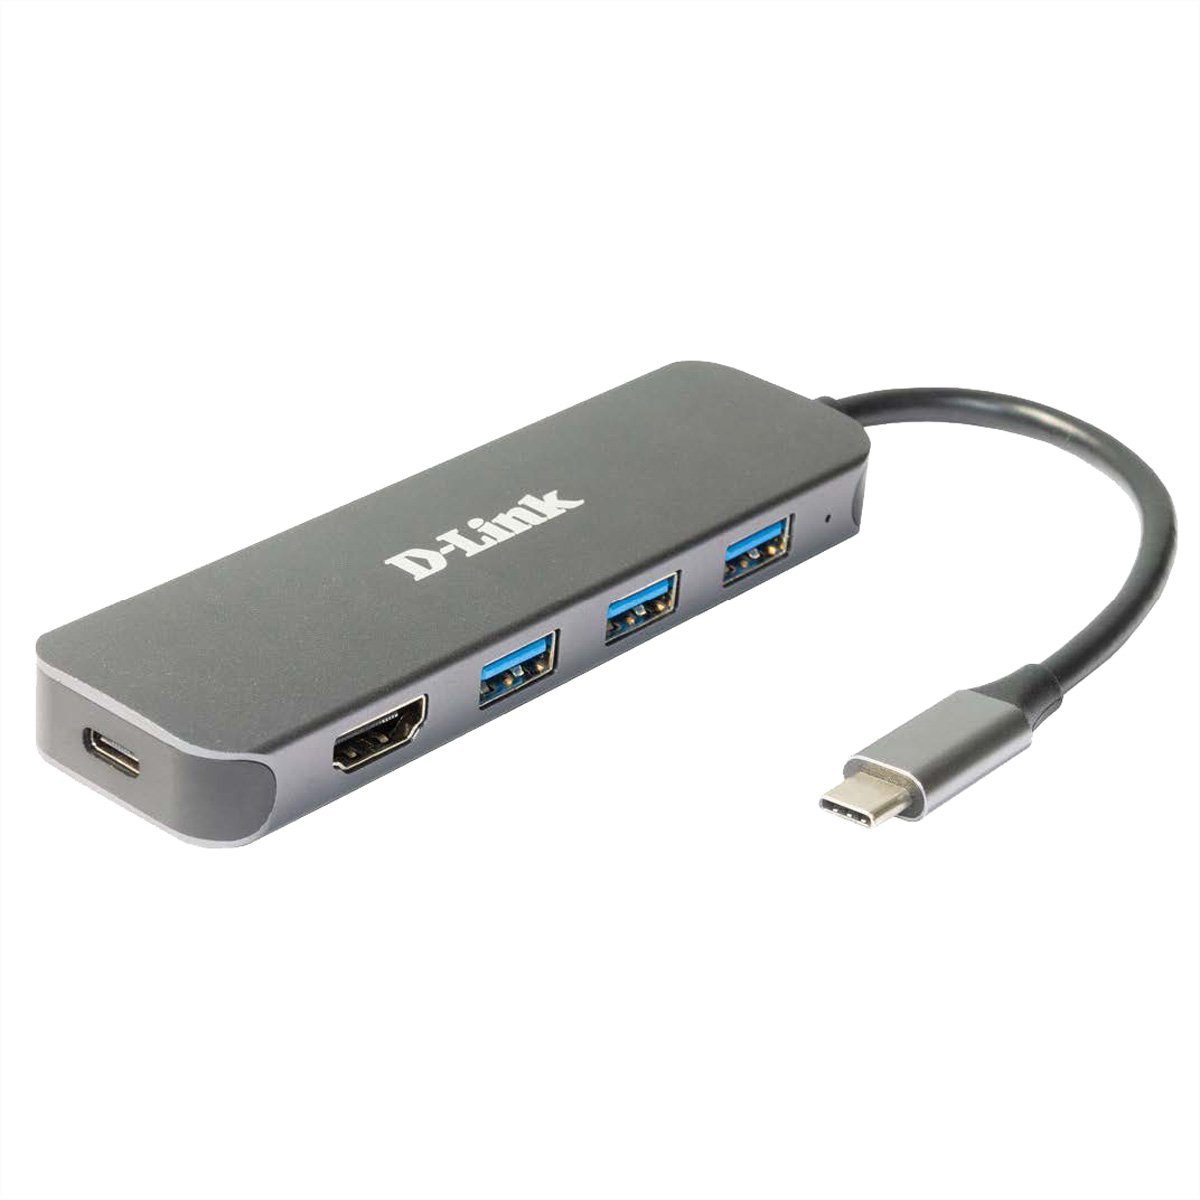 mit HDMI/Power Computer-Adapter DUB-2333 5-in-1 Hub D-Link Delivery USB-C